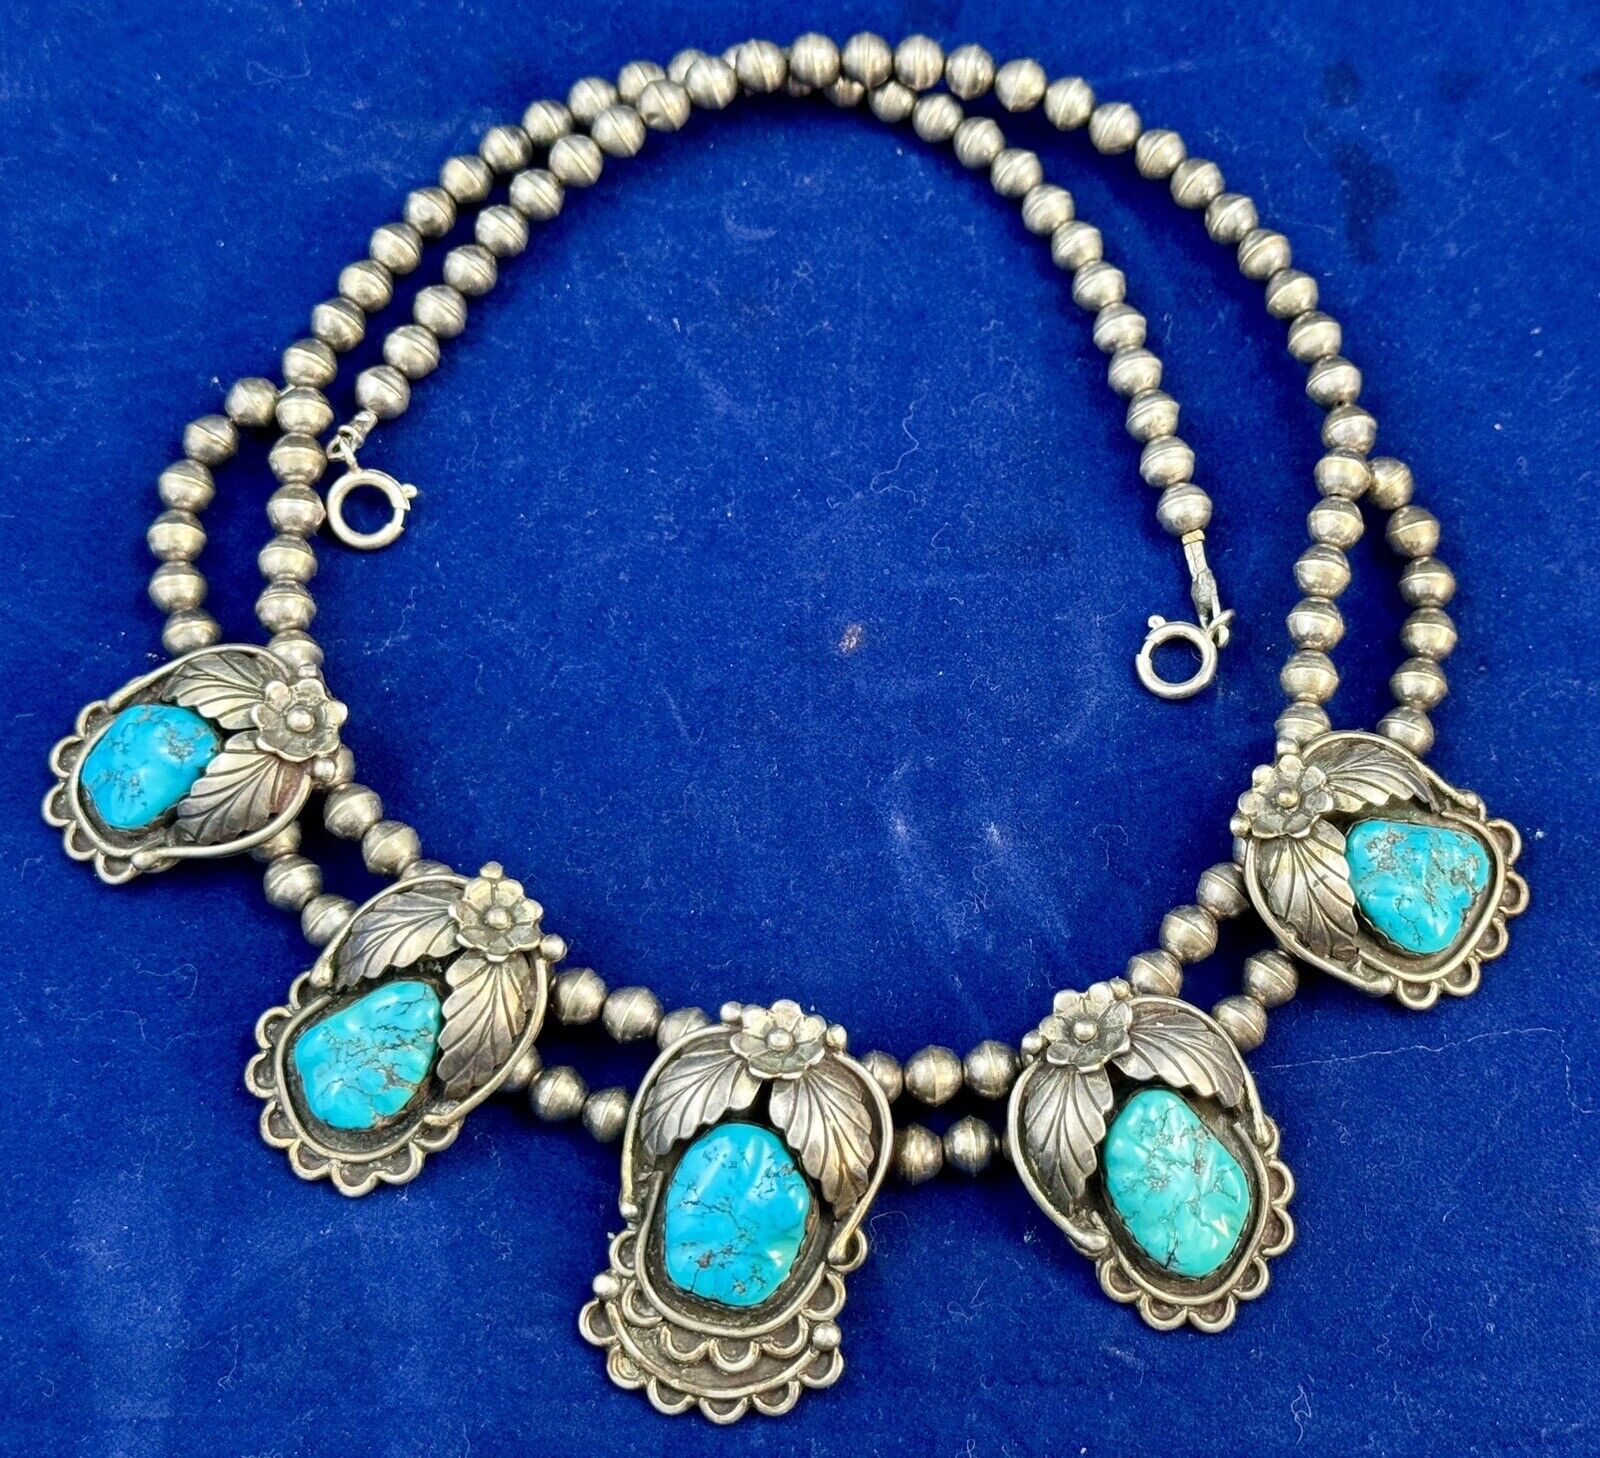 Vintage Squash Blossom Navajo Pearls Silver Auth Turquoise Necklace Signed FG